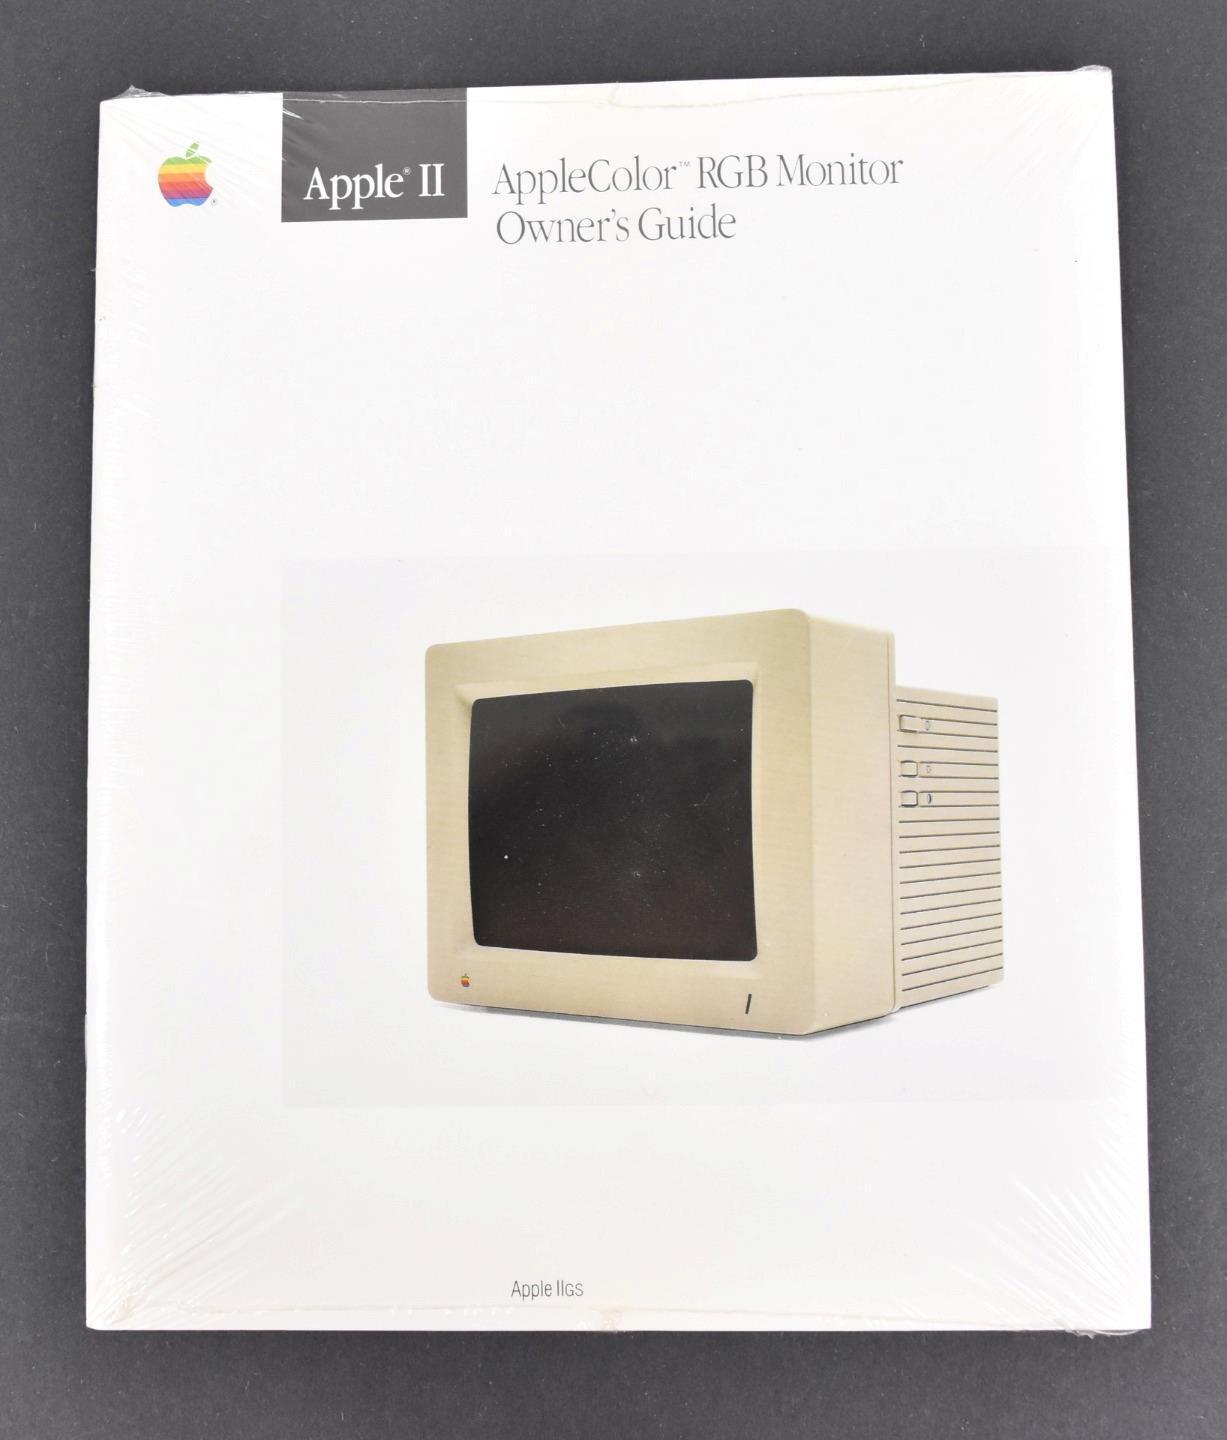 Vintage Apple II AppleColor RGB Monitor Owner's Guide  030-3106-B